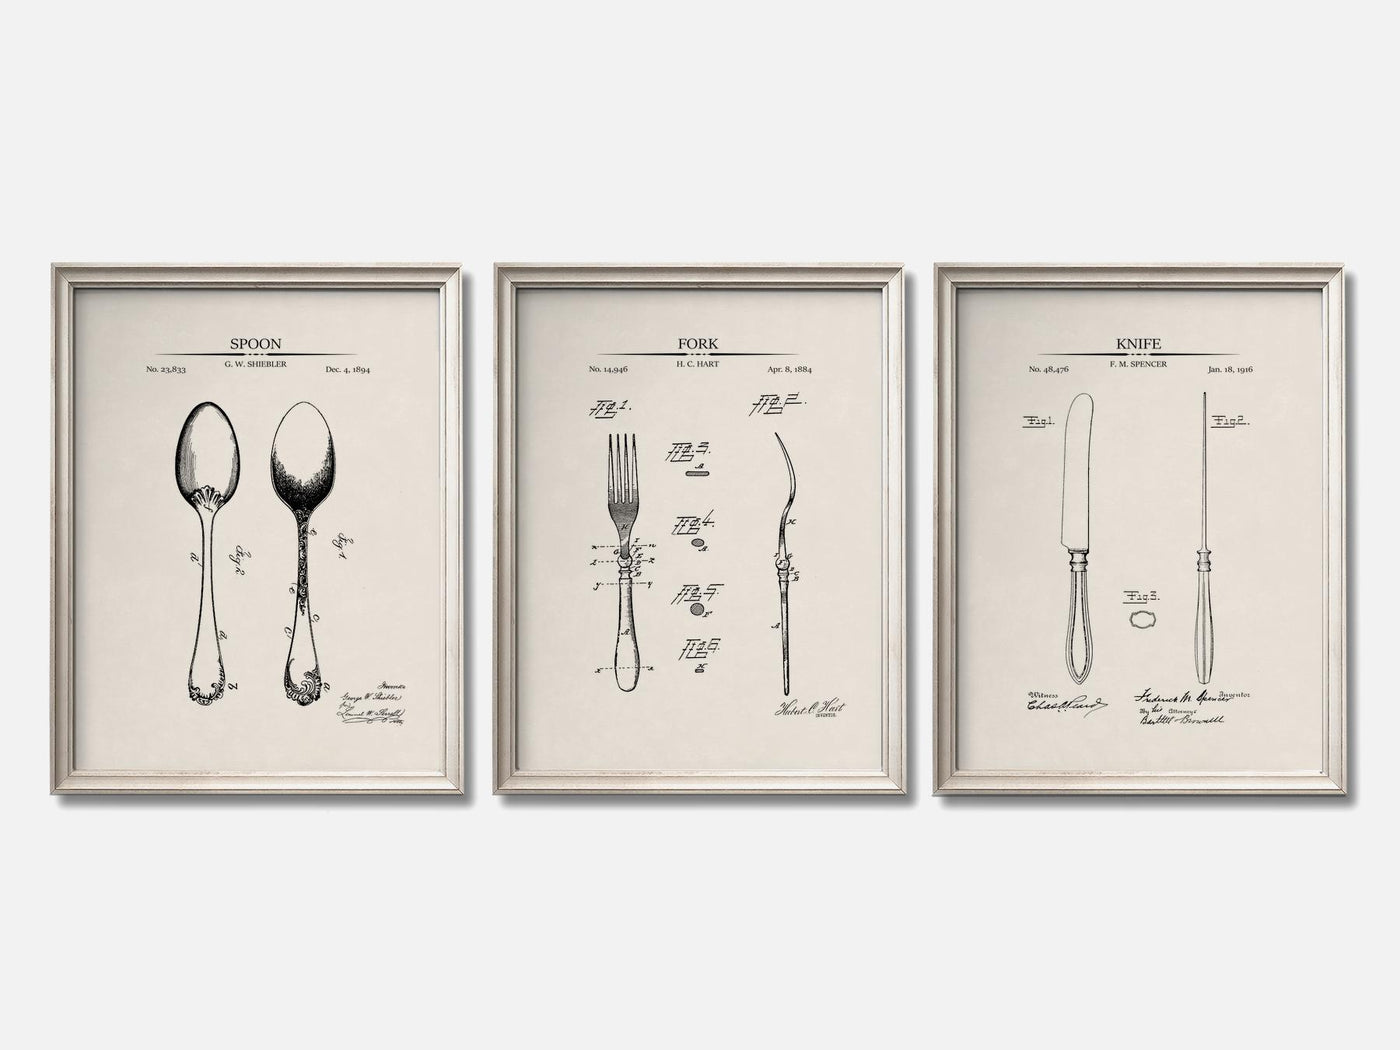 Dining Room Patent Print Set of 3 mockup - A_t10021-V1-PC_F+O-SS_3-PS_11x14-C_ivo variant